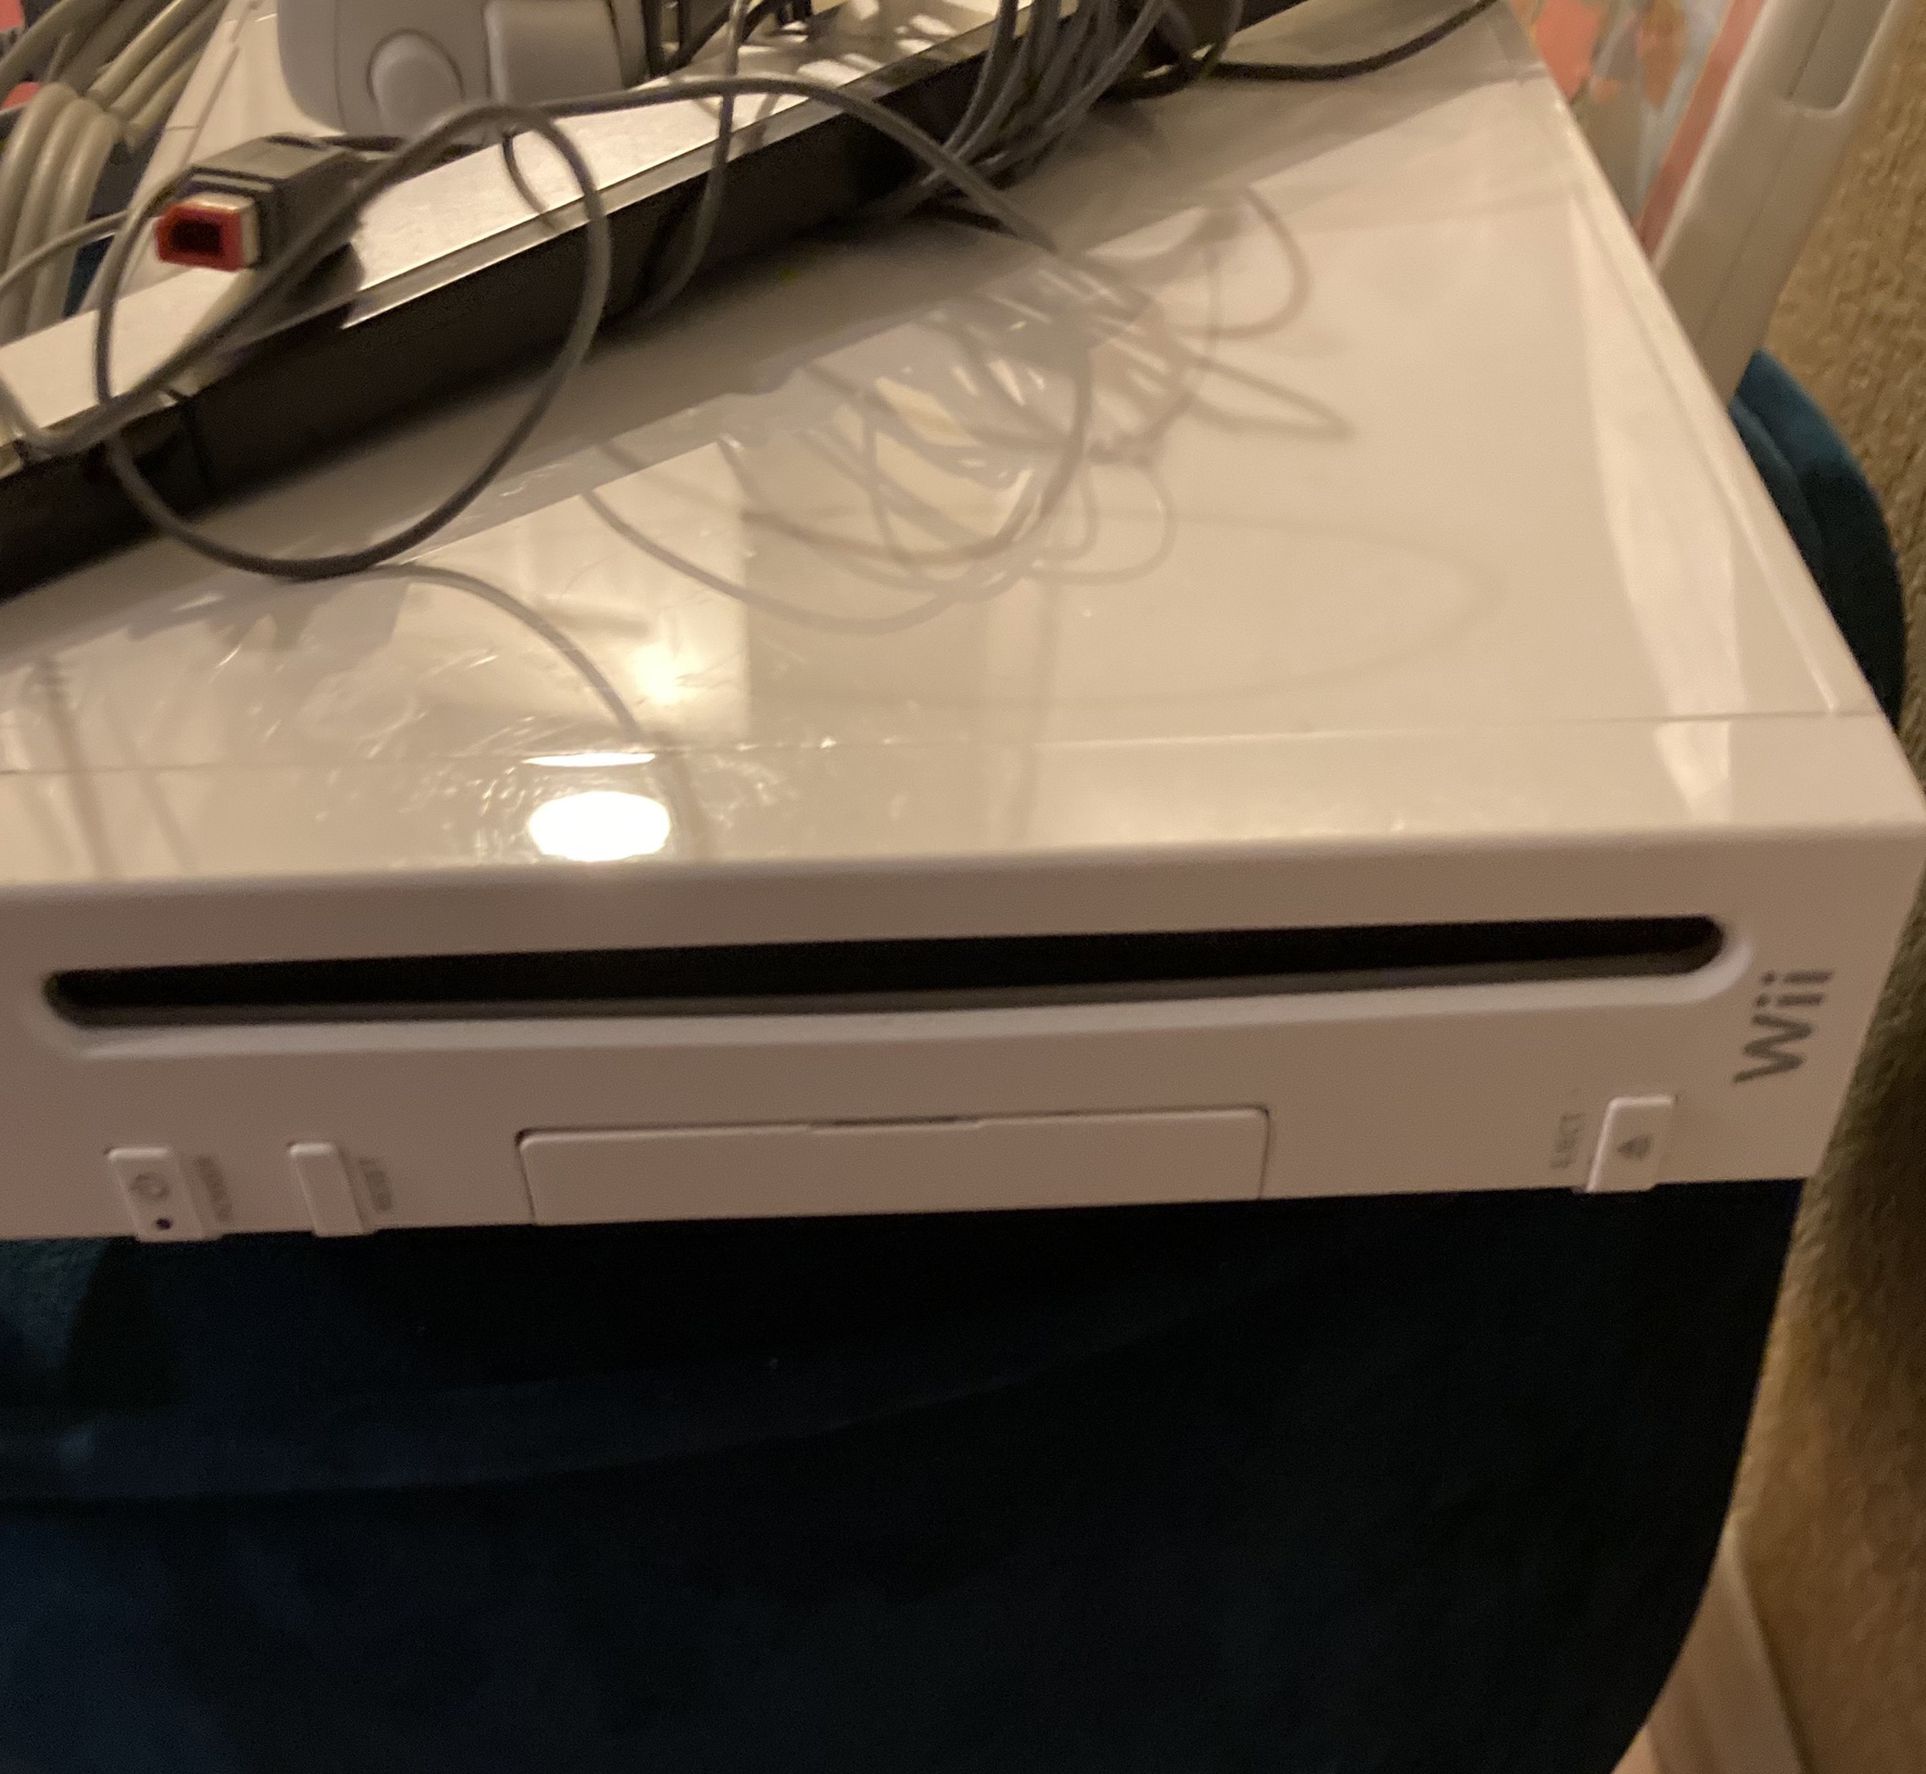 Used Nintendo Wii console with one used video game